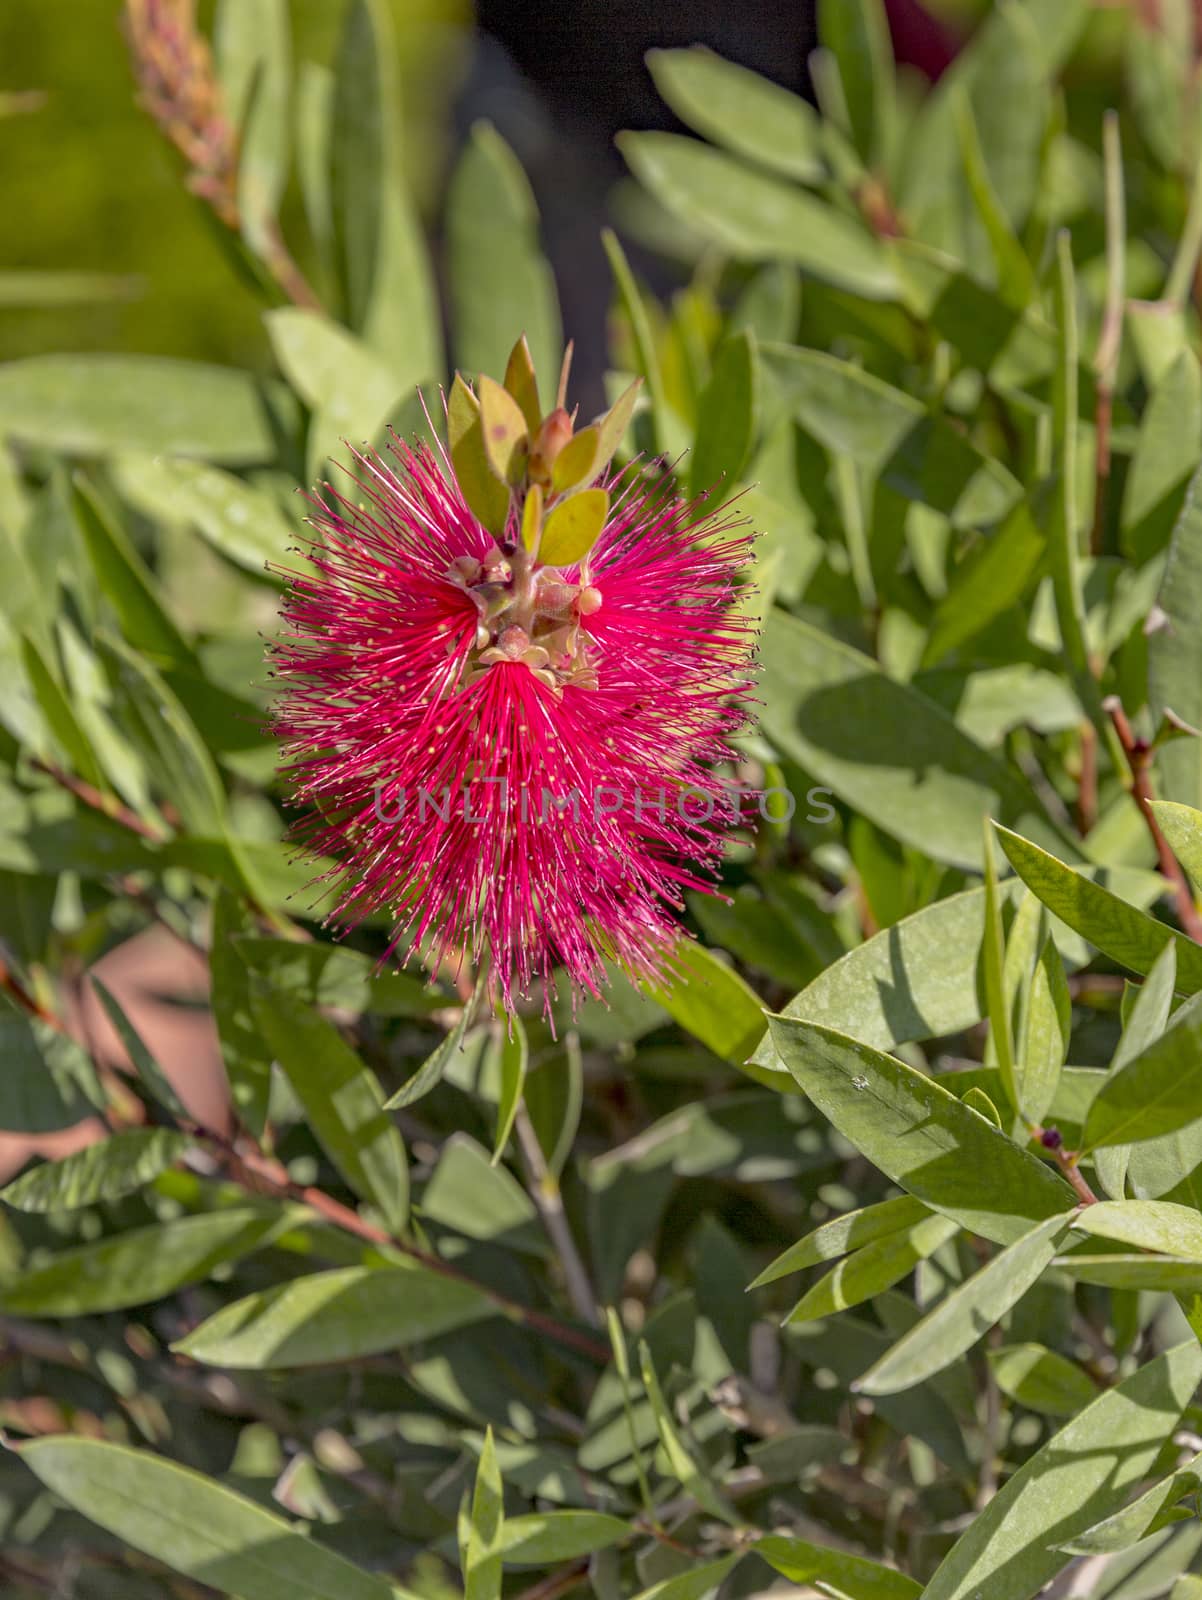 Bottlebrush flower colored red from tropical areas.